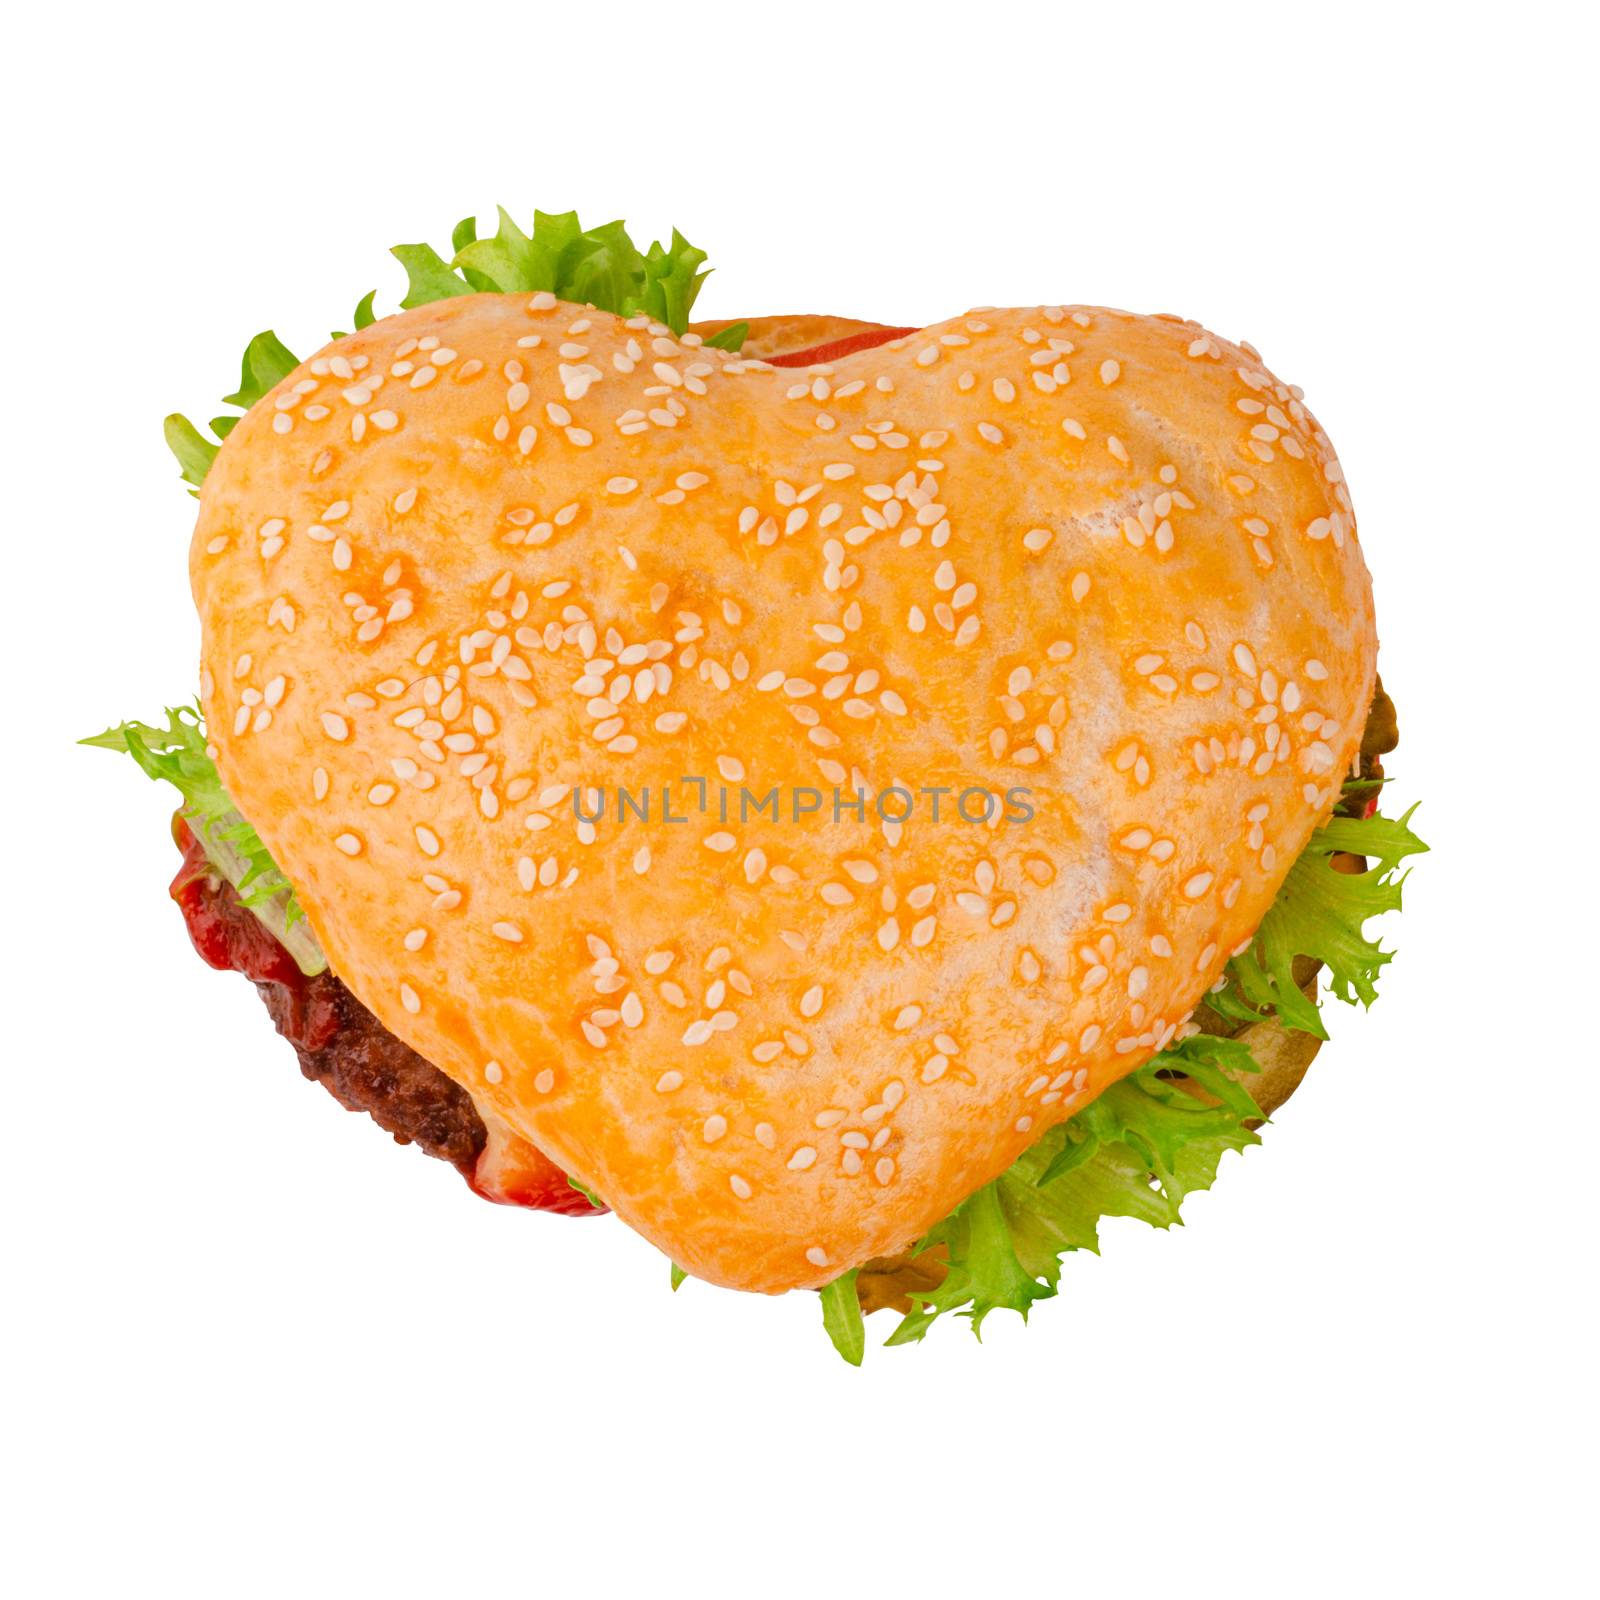 Heart shape burger cheeseburger hamburger, love burger fast food concept, isolated on white background, top view flat lay